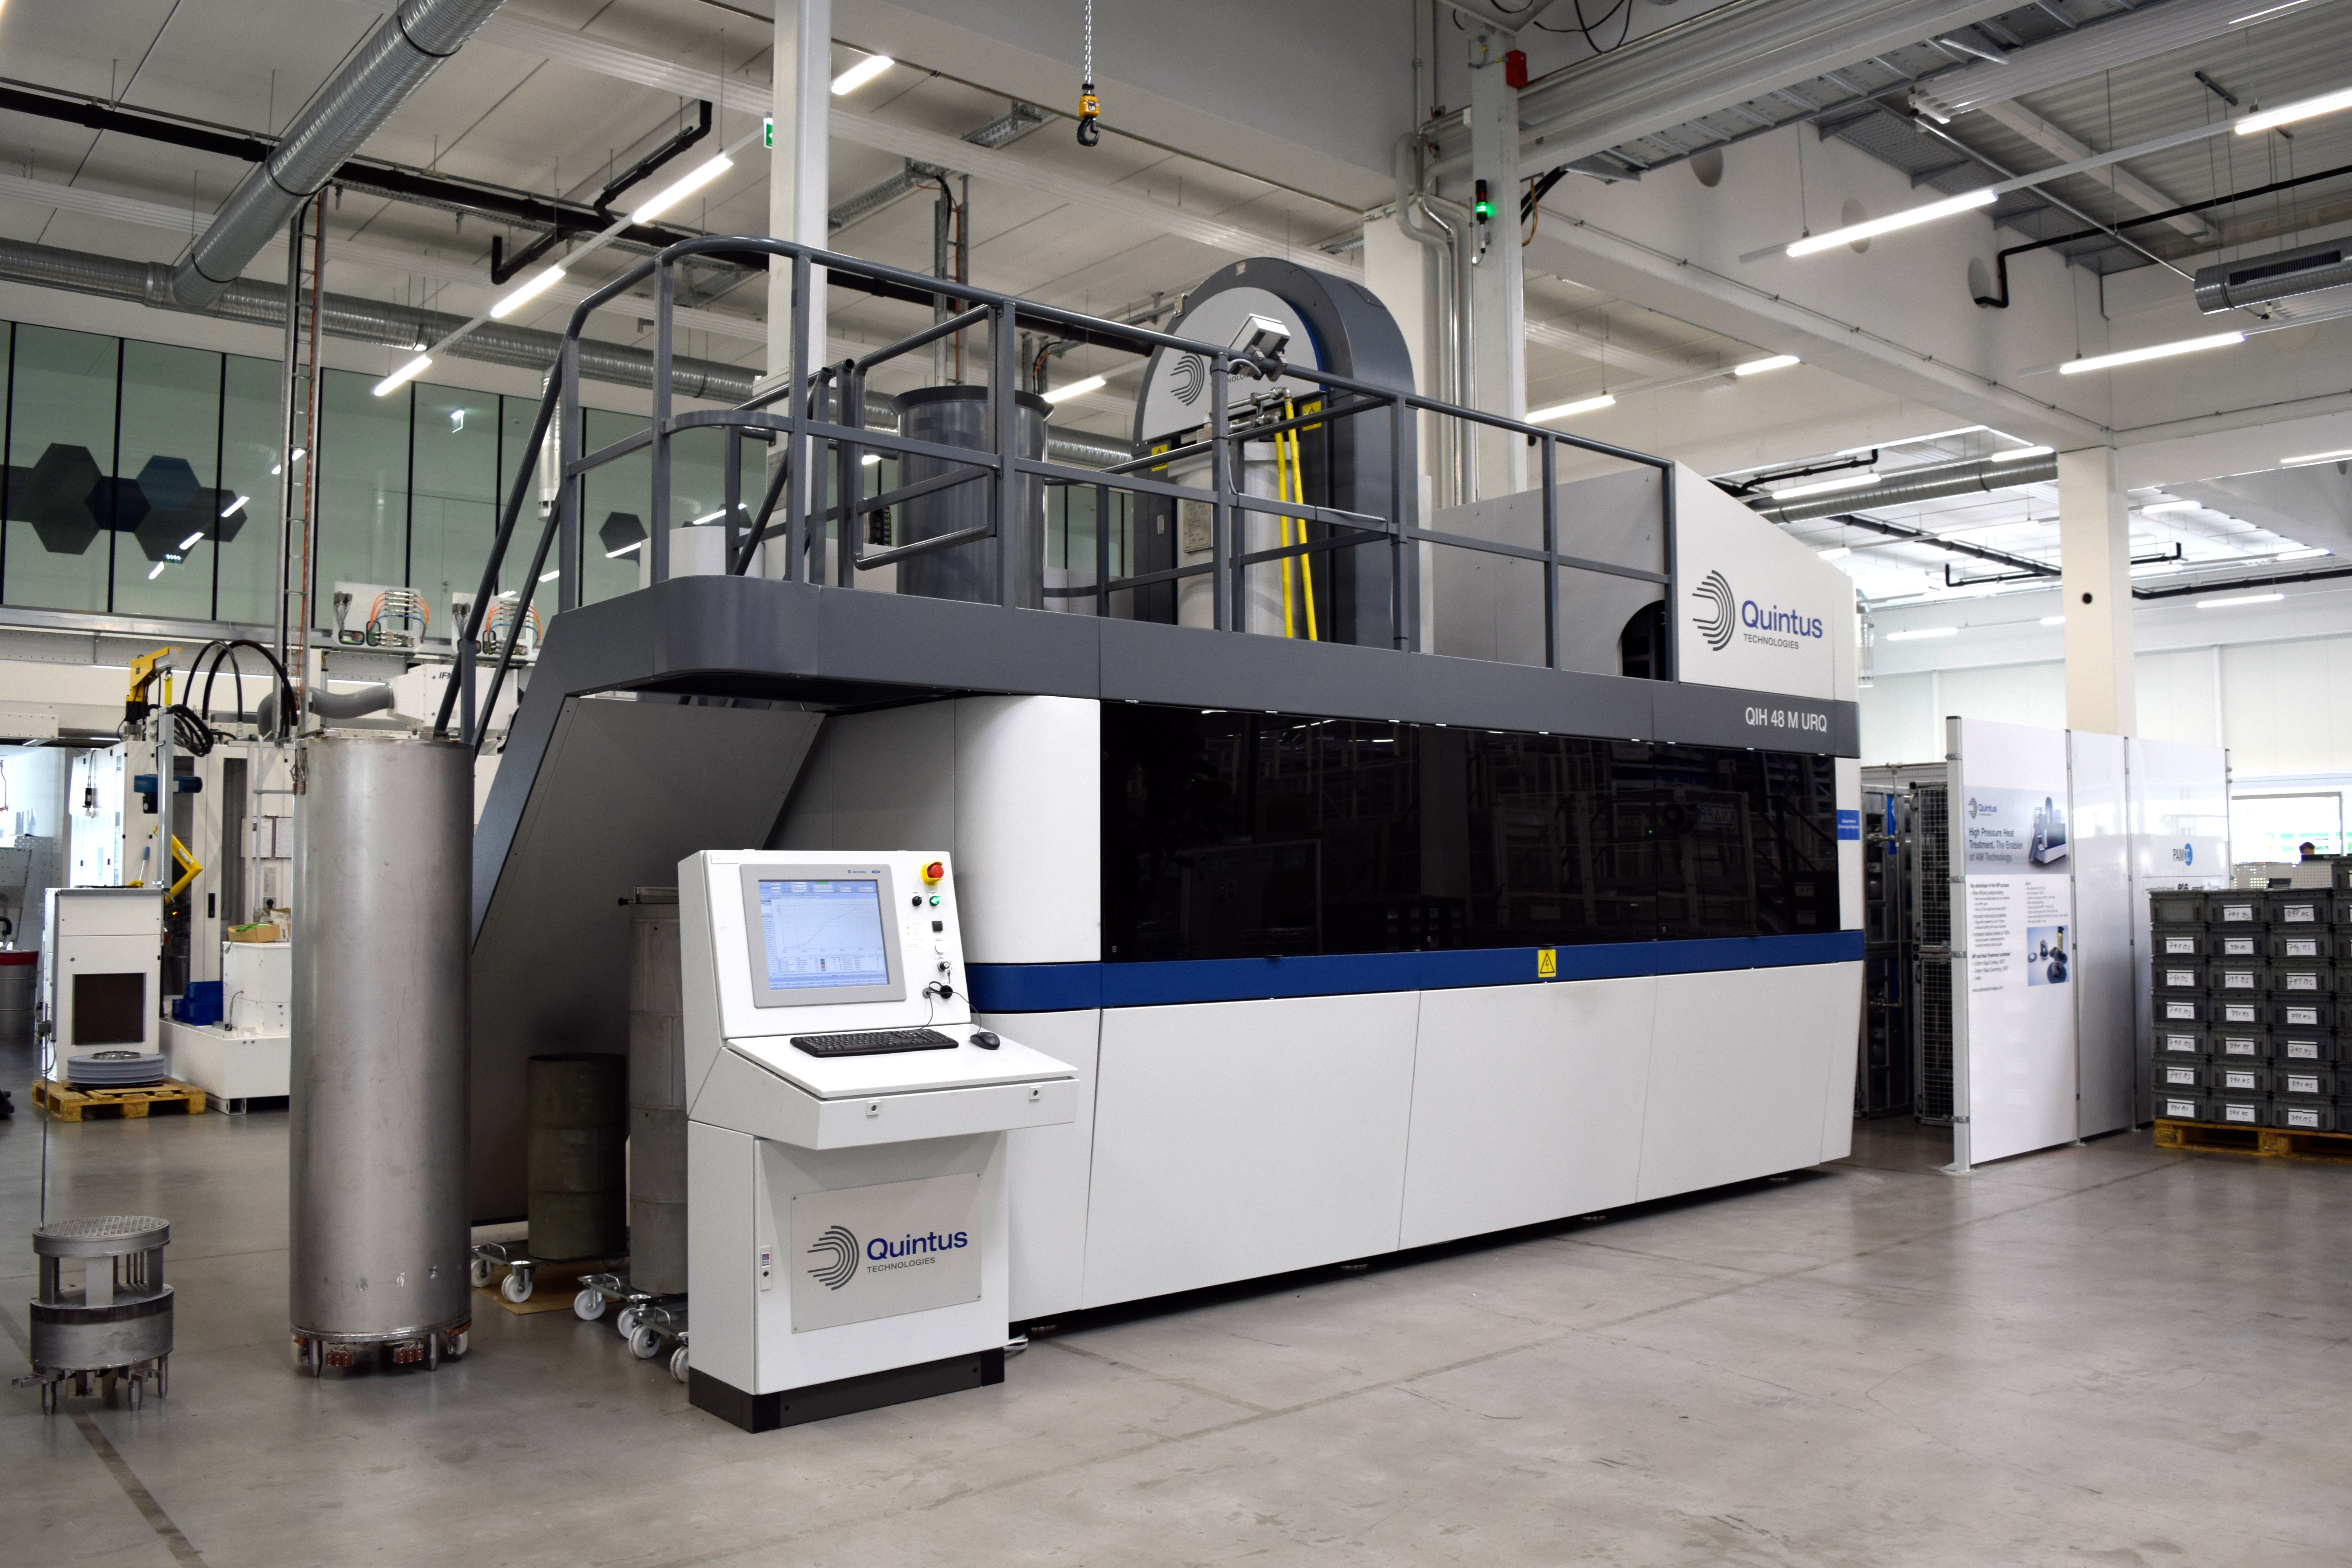 The QIH48 M URQ press is equipped with Quintus’ patented uniform rapid cooling (URC) and uniform rapid quenching (URQ) technologies. (Photo courtesy Quintus Technologies.)